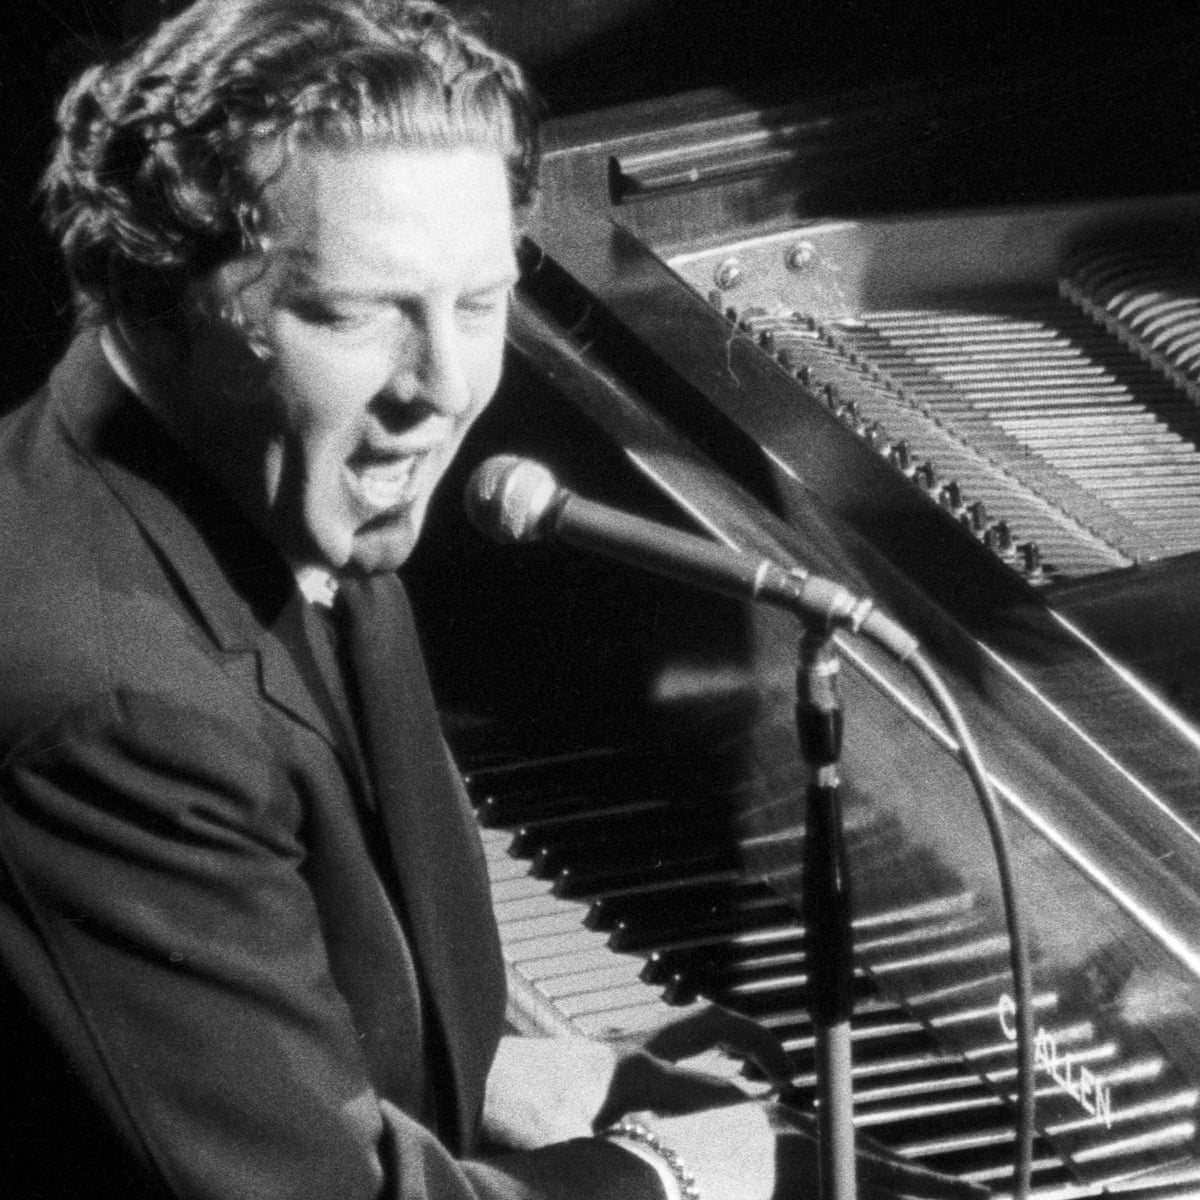 Jerry Lee Lewis obituary | Pop and rock | The Guardian